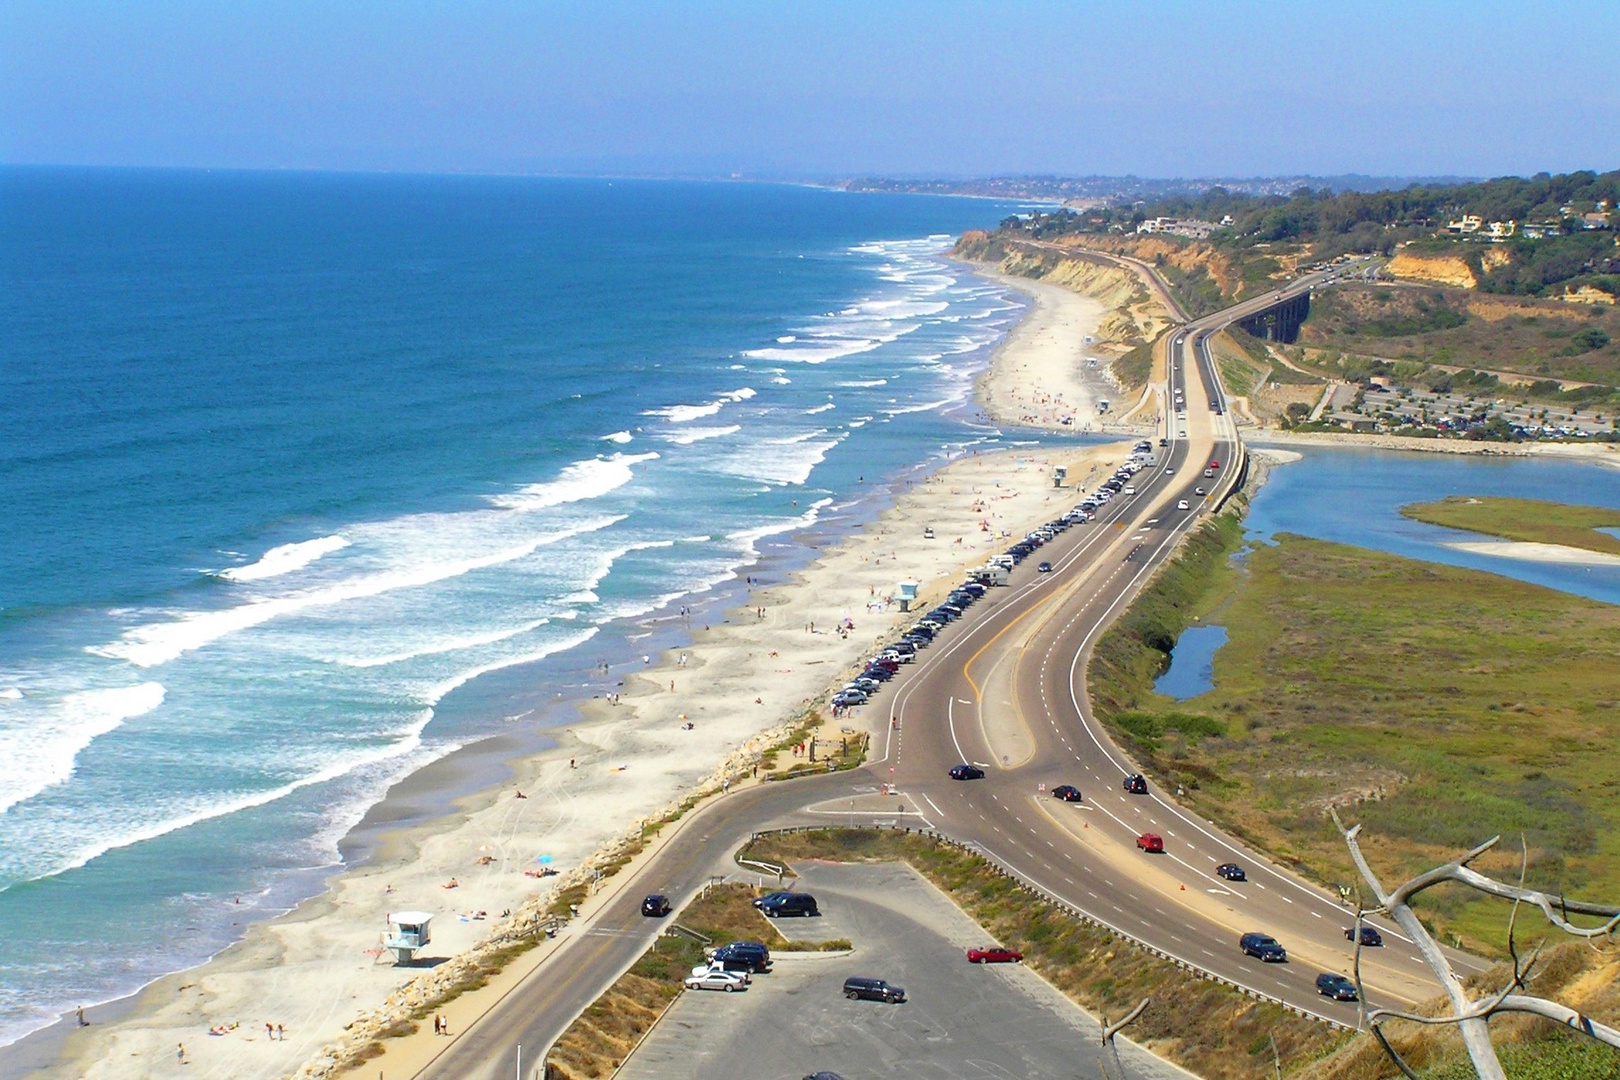 5 minutes from Torrey Pines Beach & Reserve